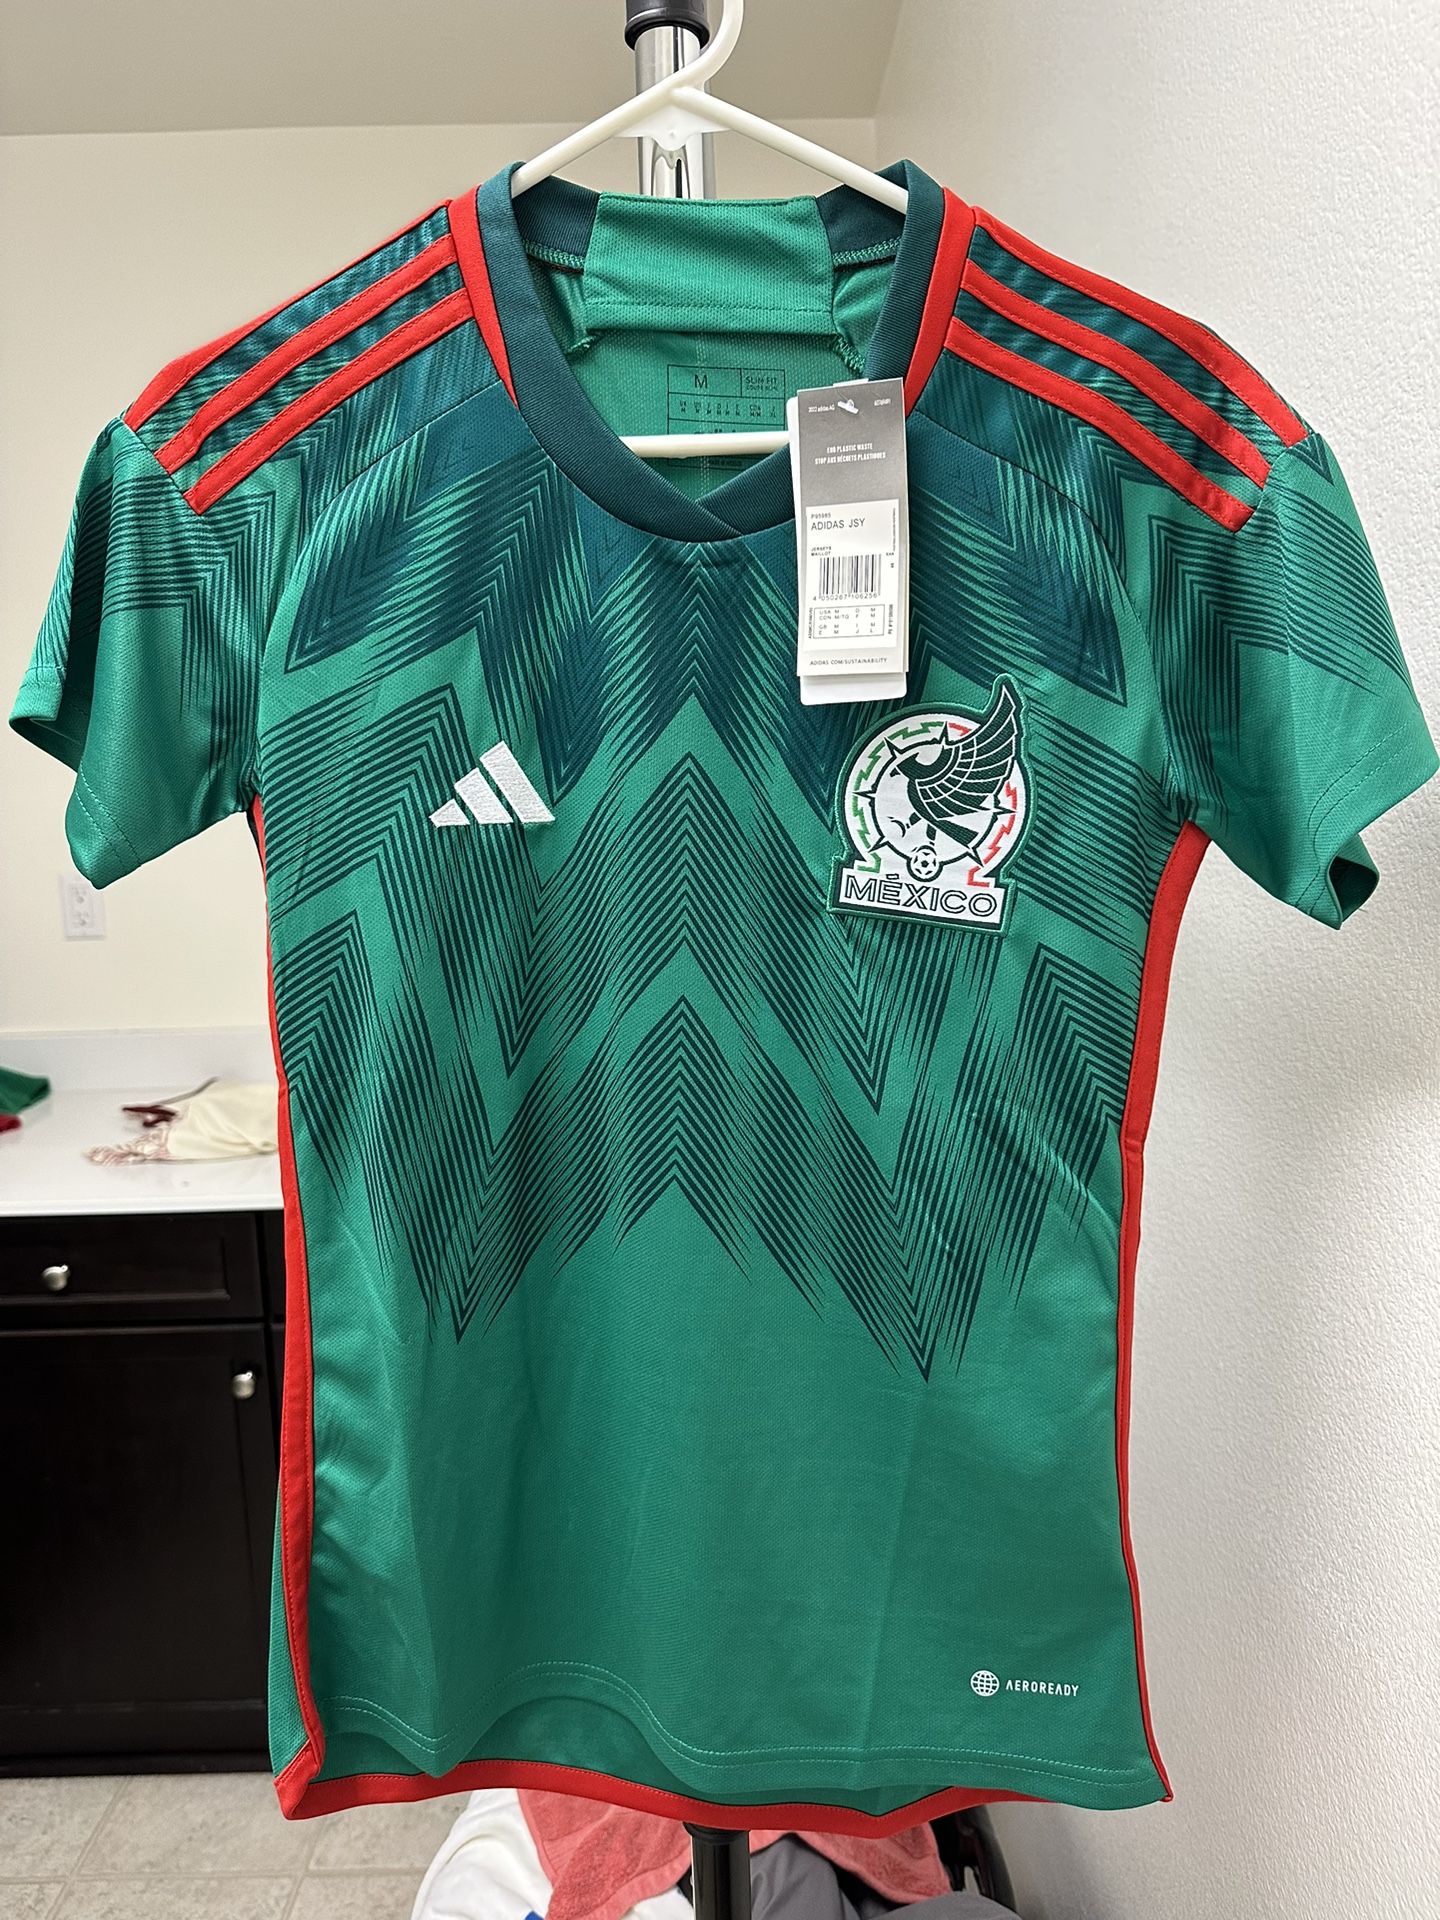 Women’s Mexico Jersey Home for Sale in Murrieta, CA - OfferUp